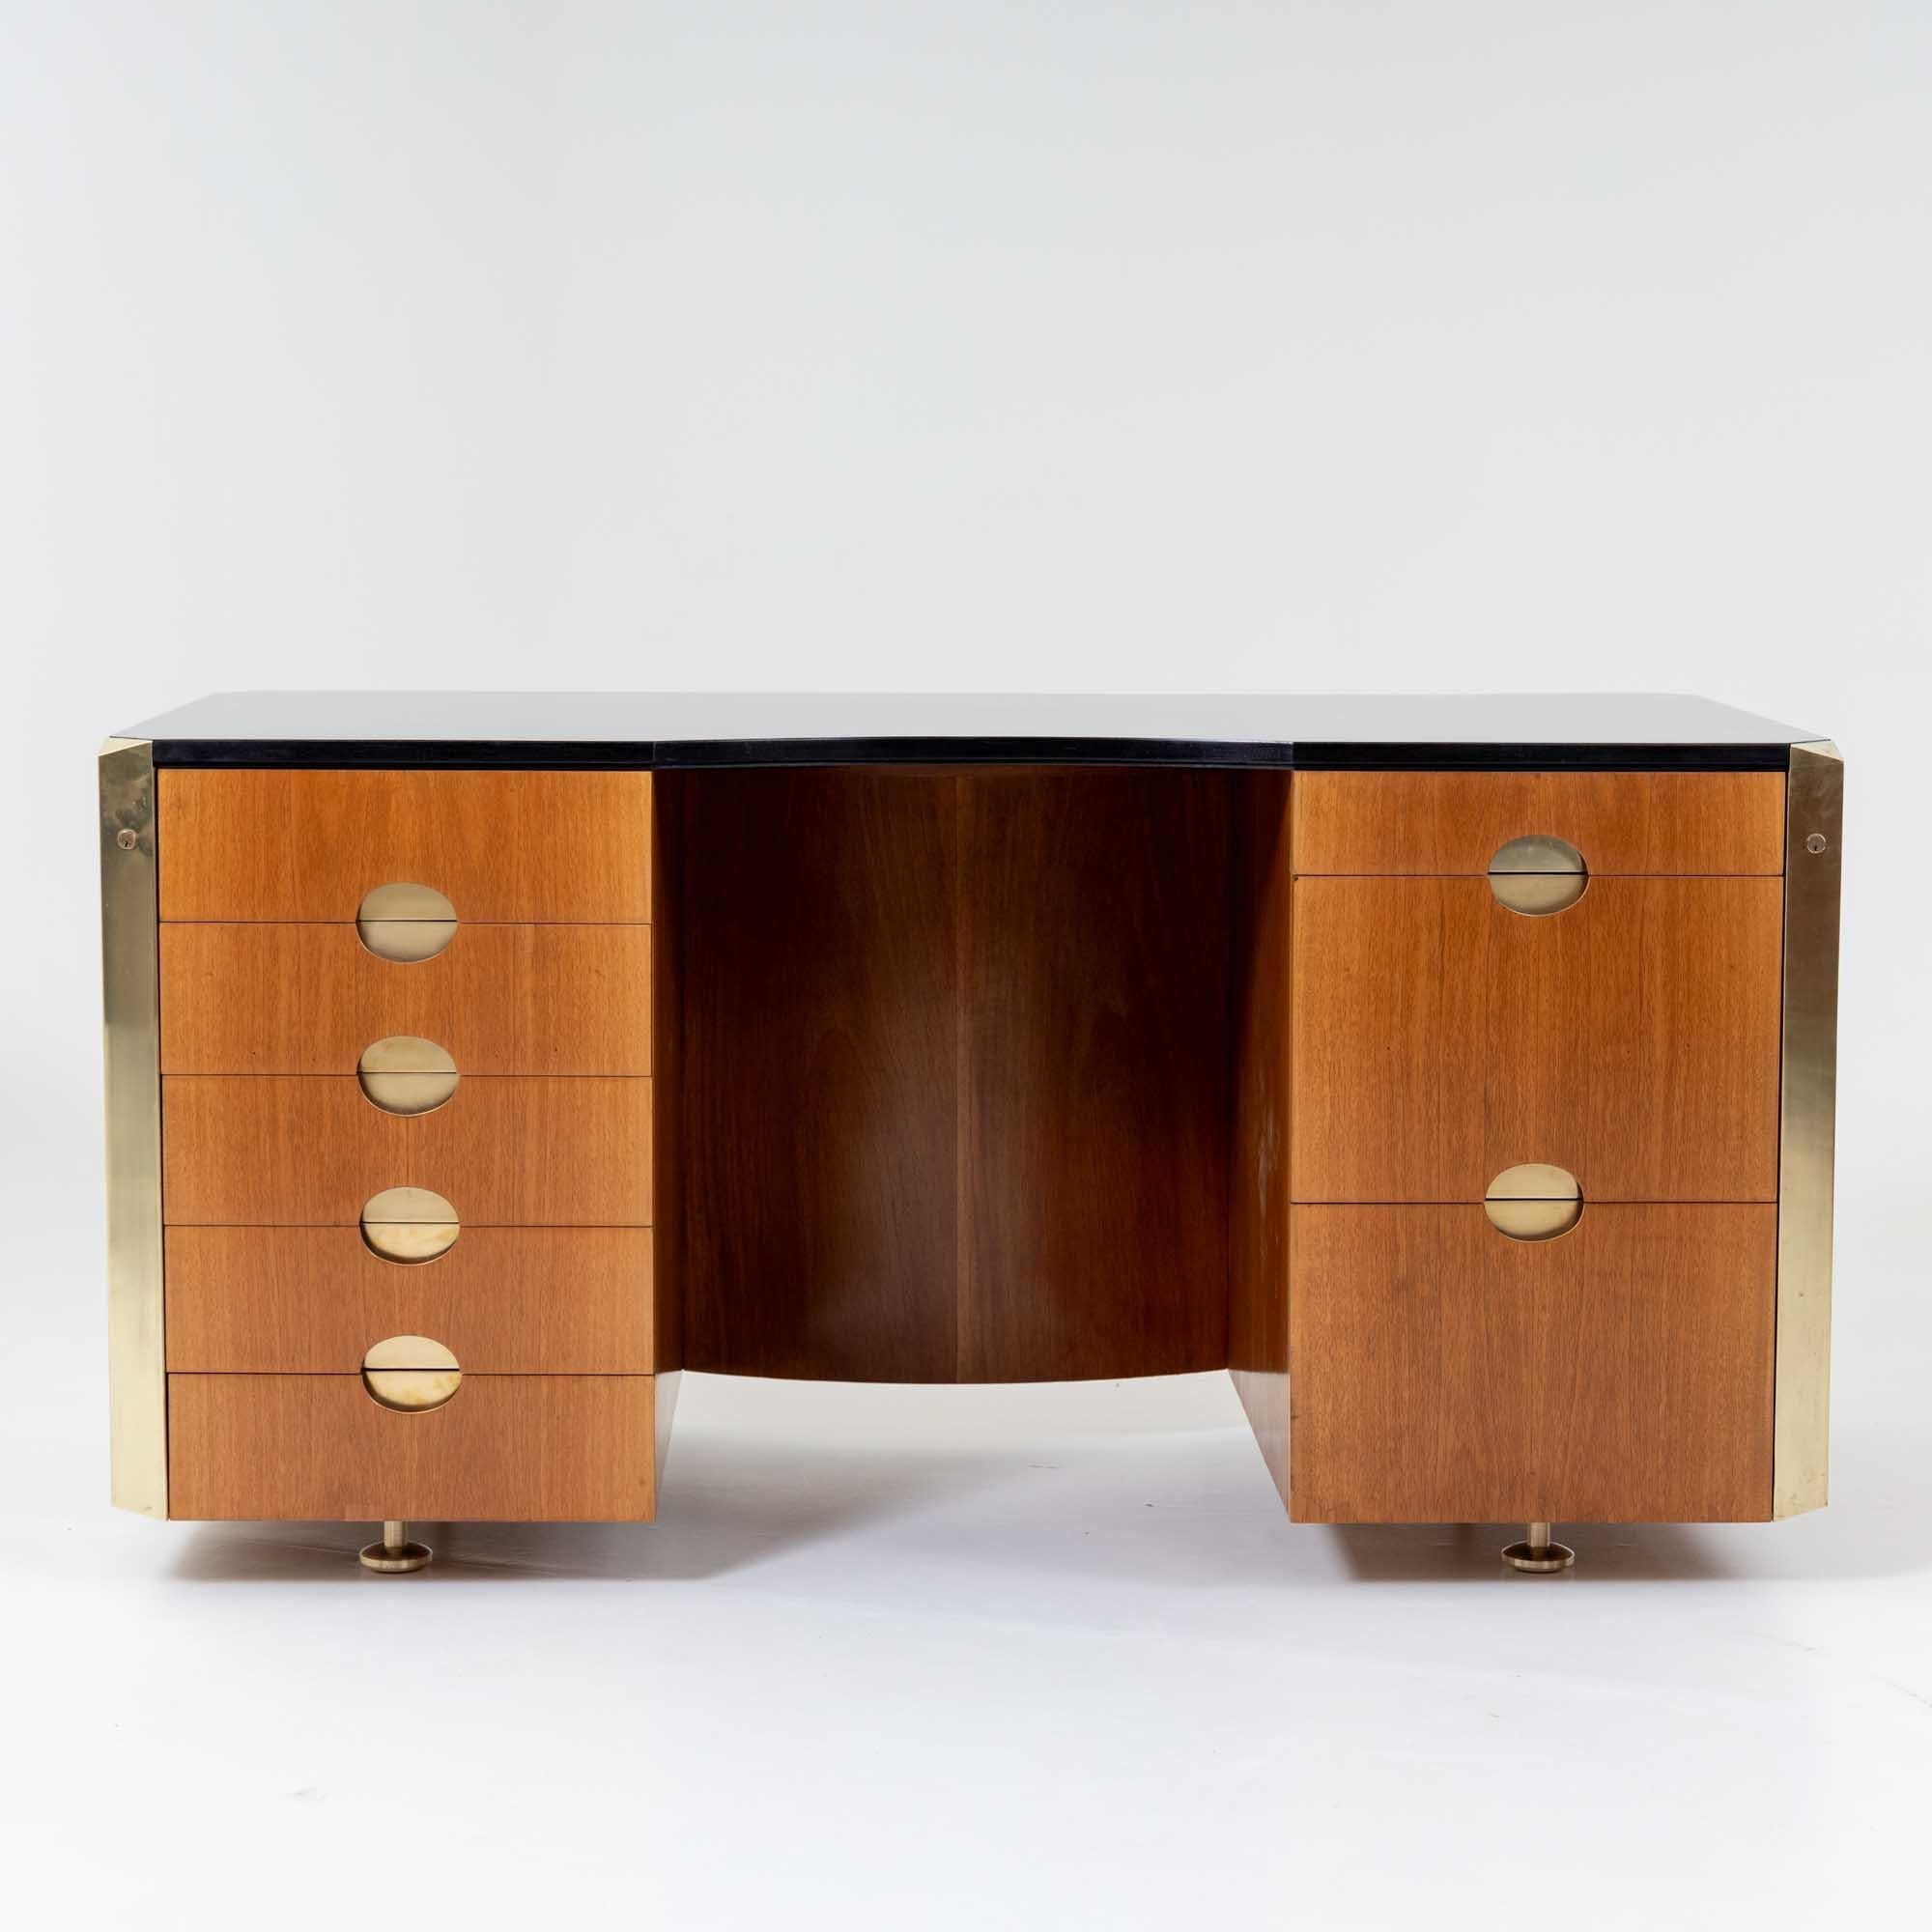 Large desk, designed by Luigi Caccia Dominioni for Azucena in the 1960s. The desk stands on brass legs that are set back under the drawer elements, giving it an elegant, floating character. The total of eight drawers at the front offer plenty of